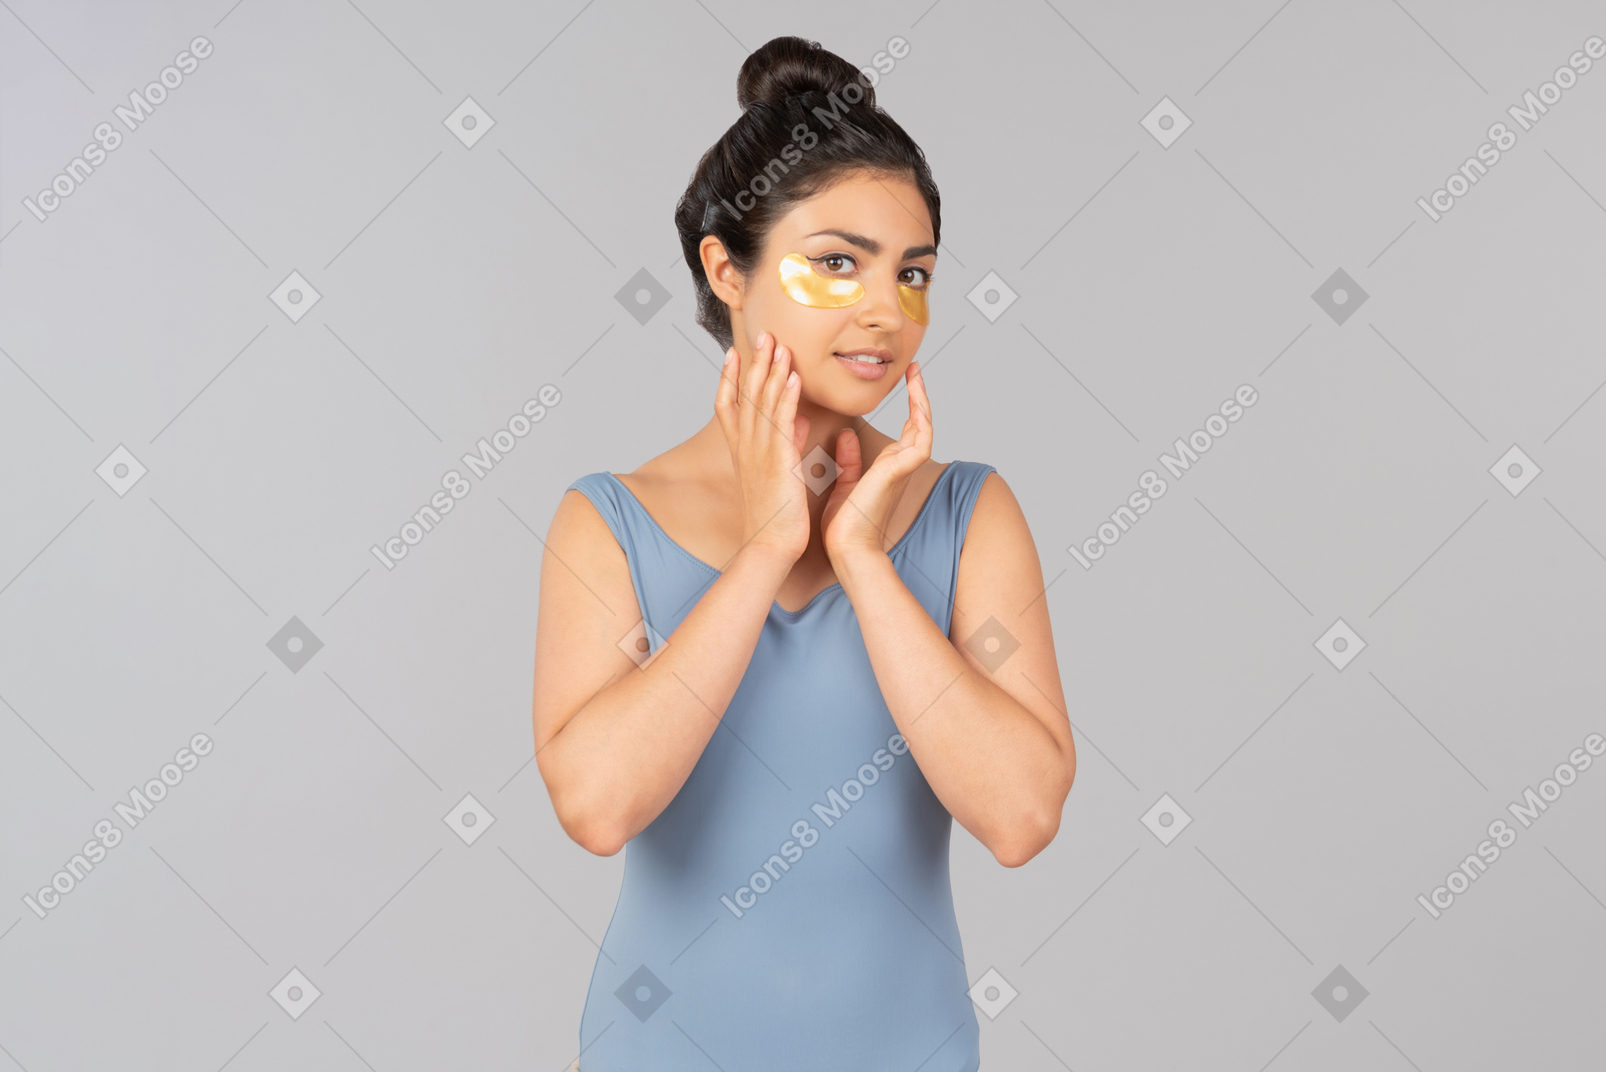 Indian woman with eye patches touching her face with hands